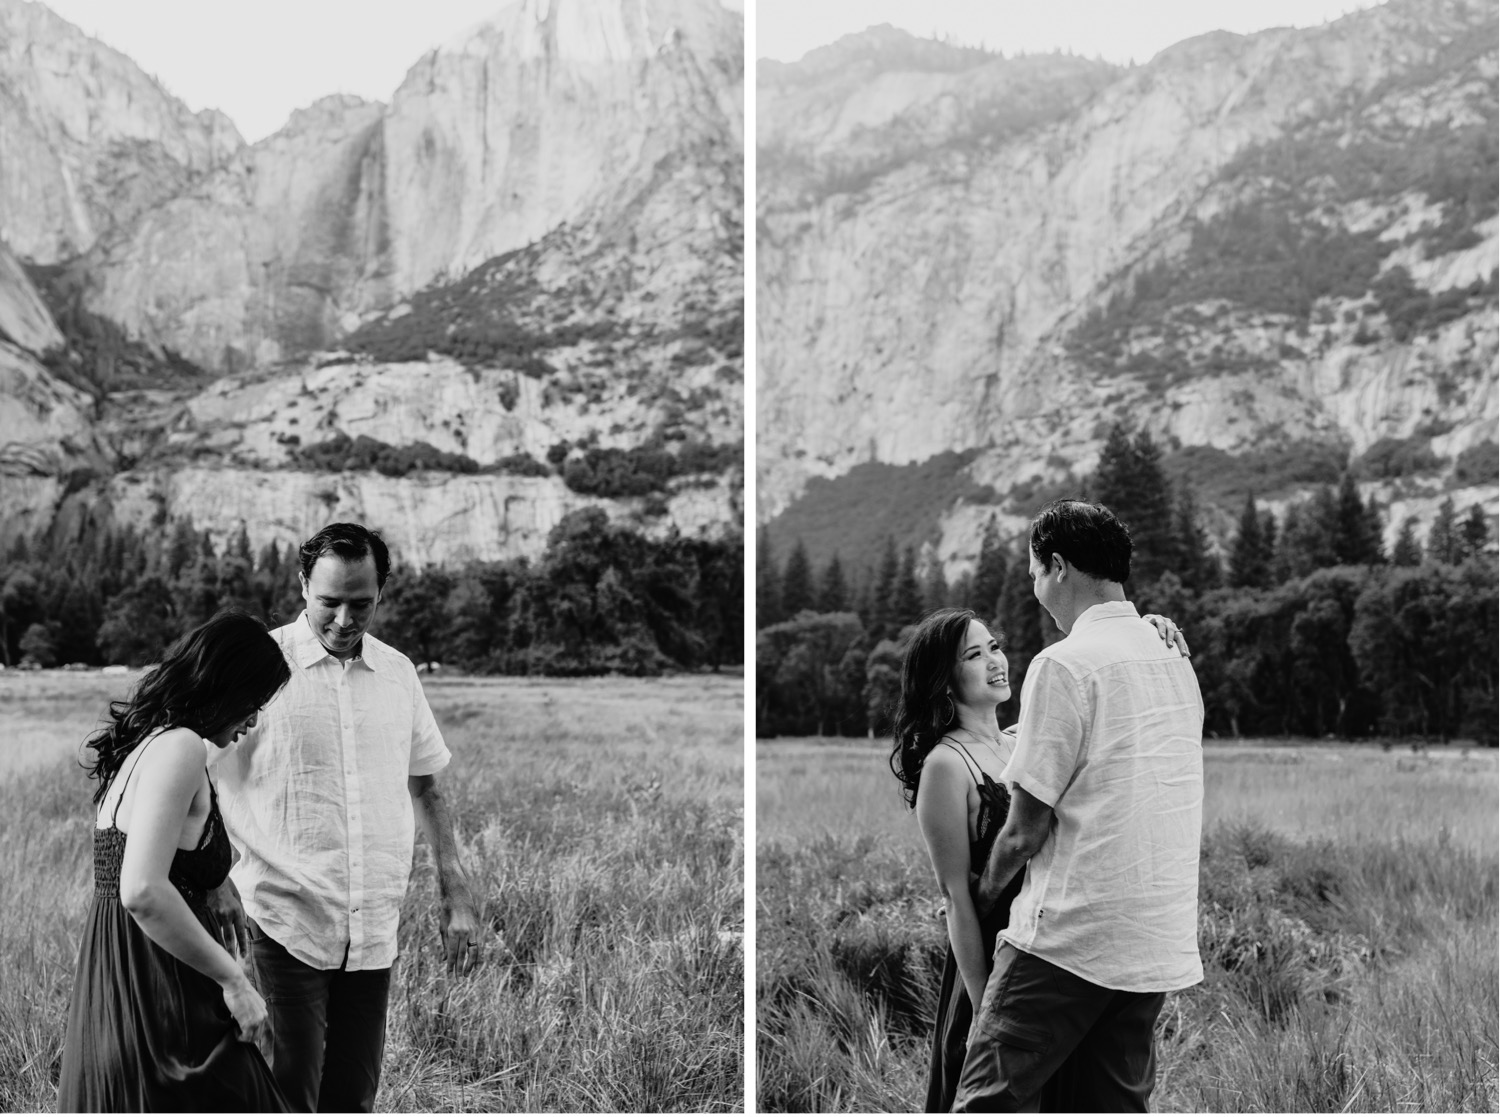 Two black and white images of a couple during their Yosemite Valley couples photoshoot.